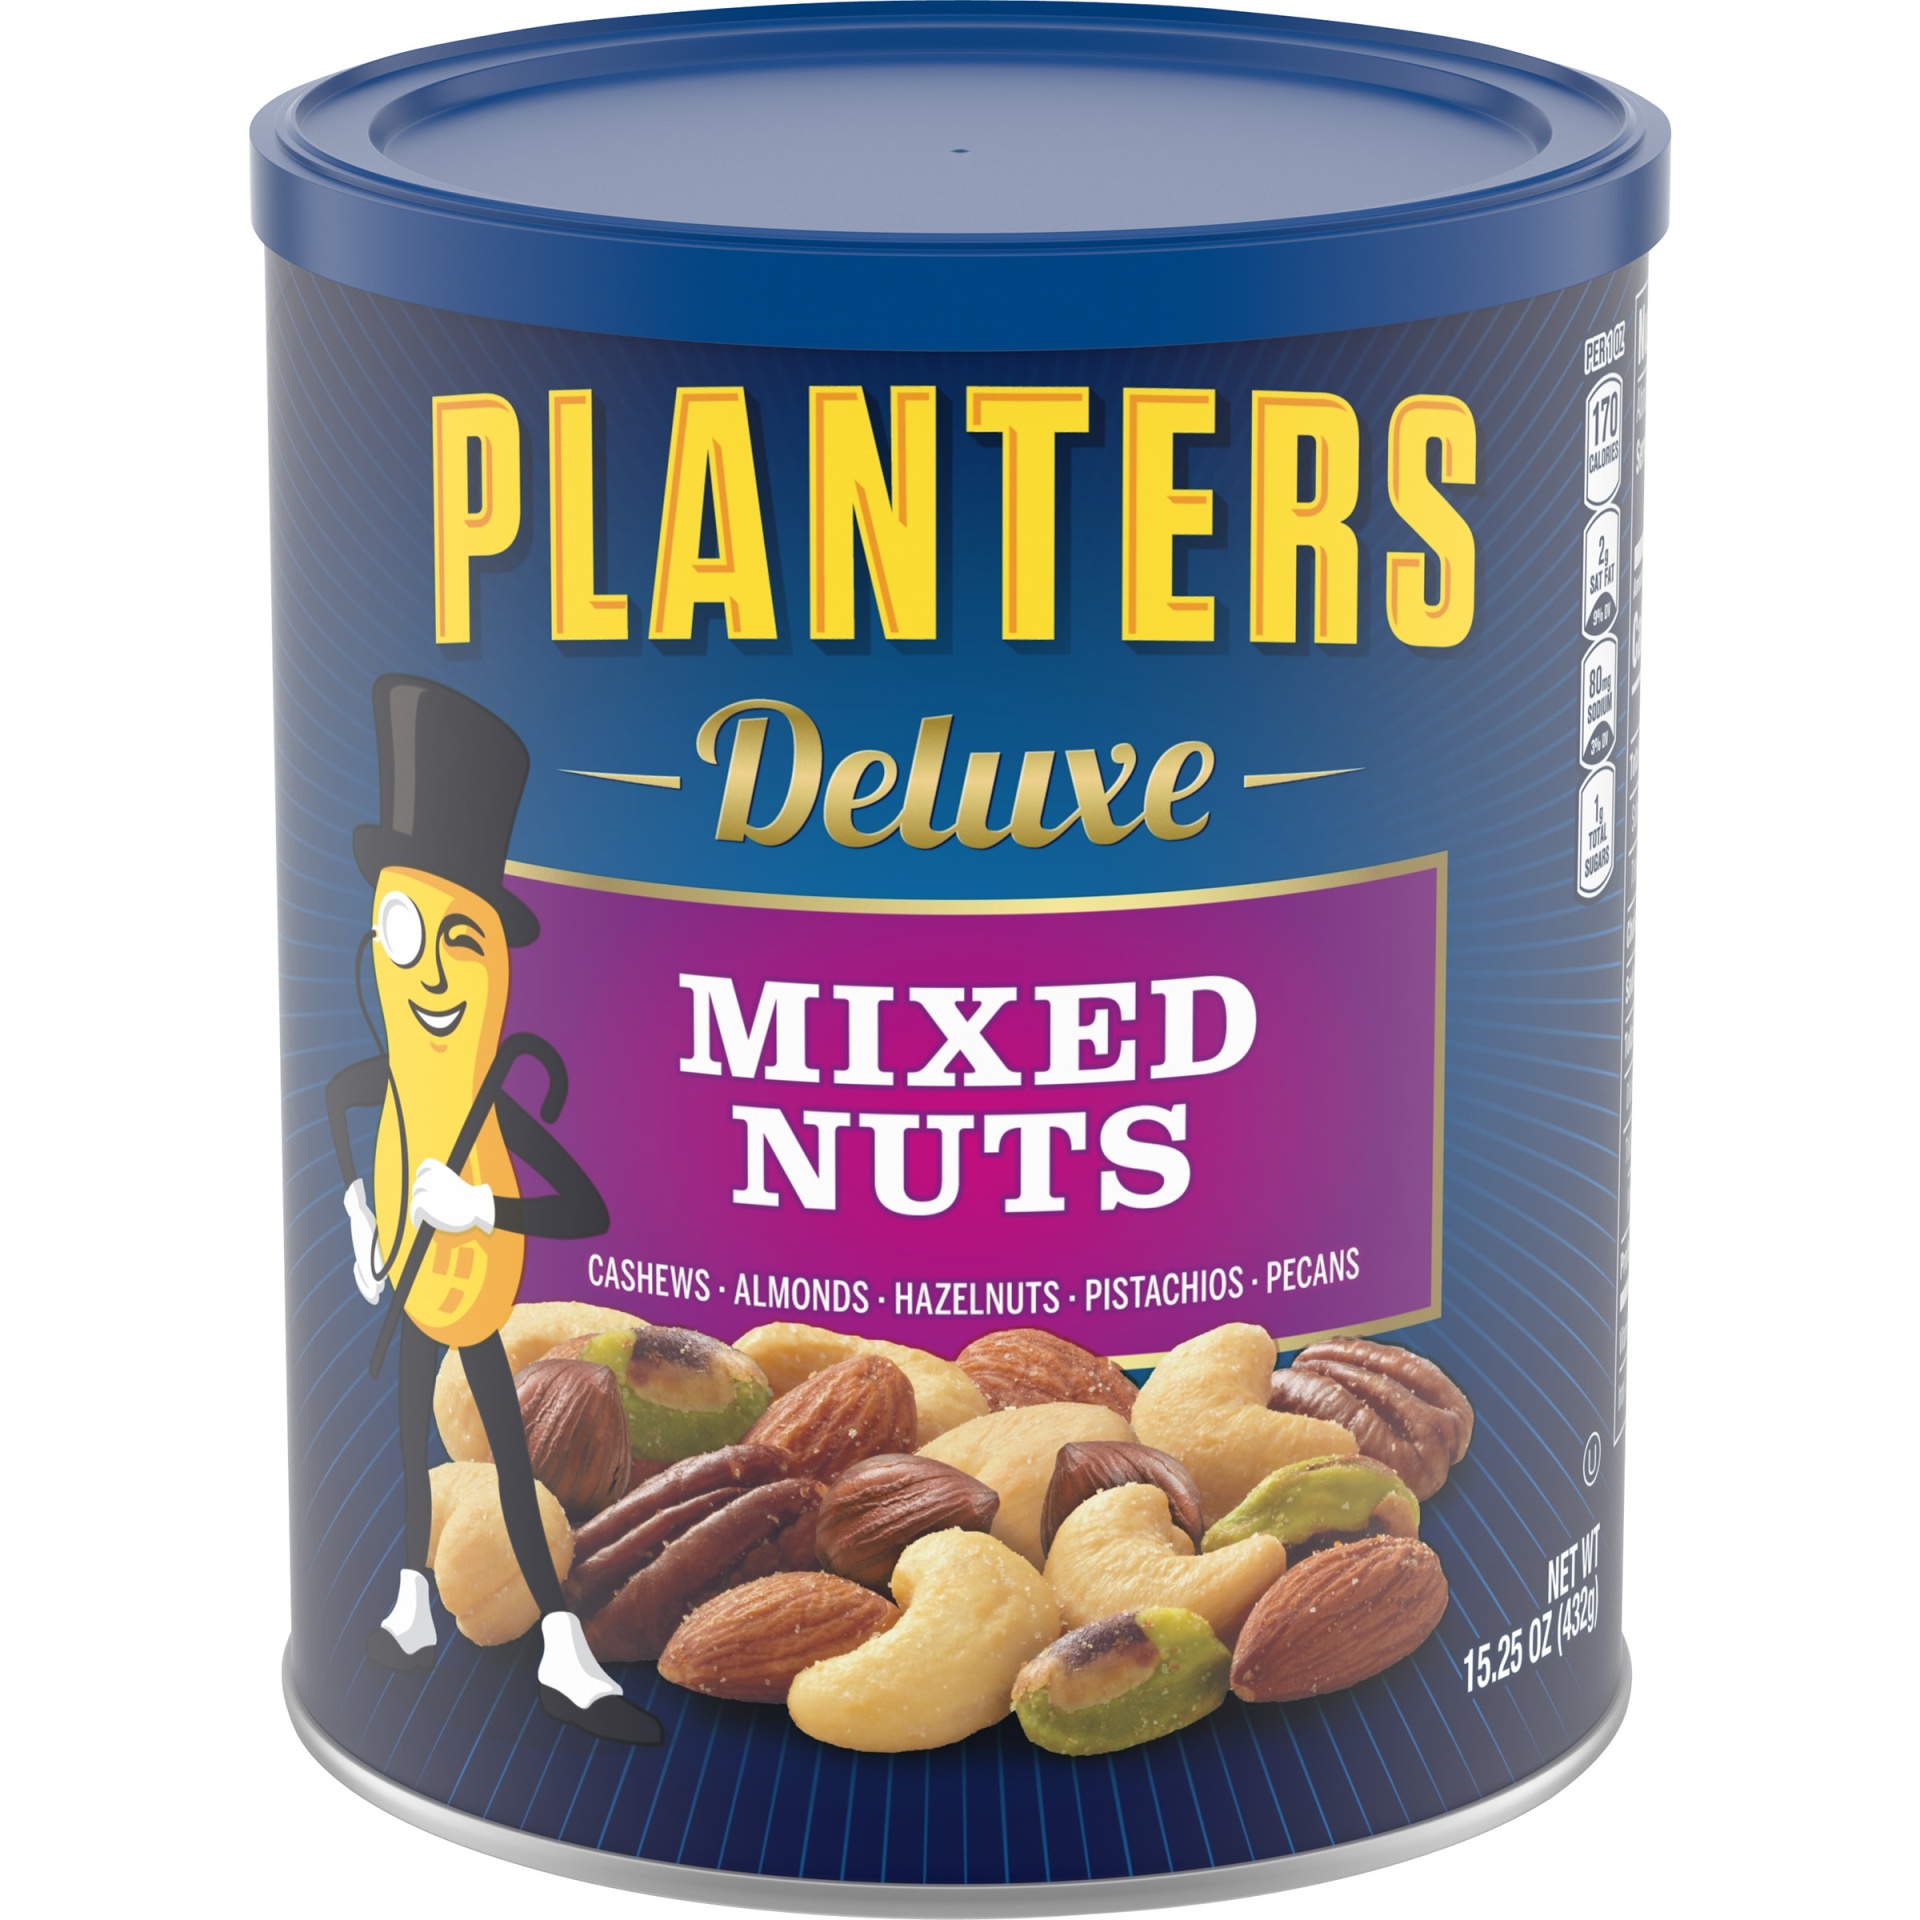 slide 1 of 2, Planters Deluxe Mixed Nuts with Cashews, Almonds, Hazelnuts, Pistachios & Pecans, 15.25 oz